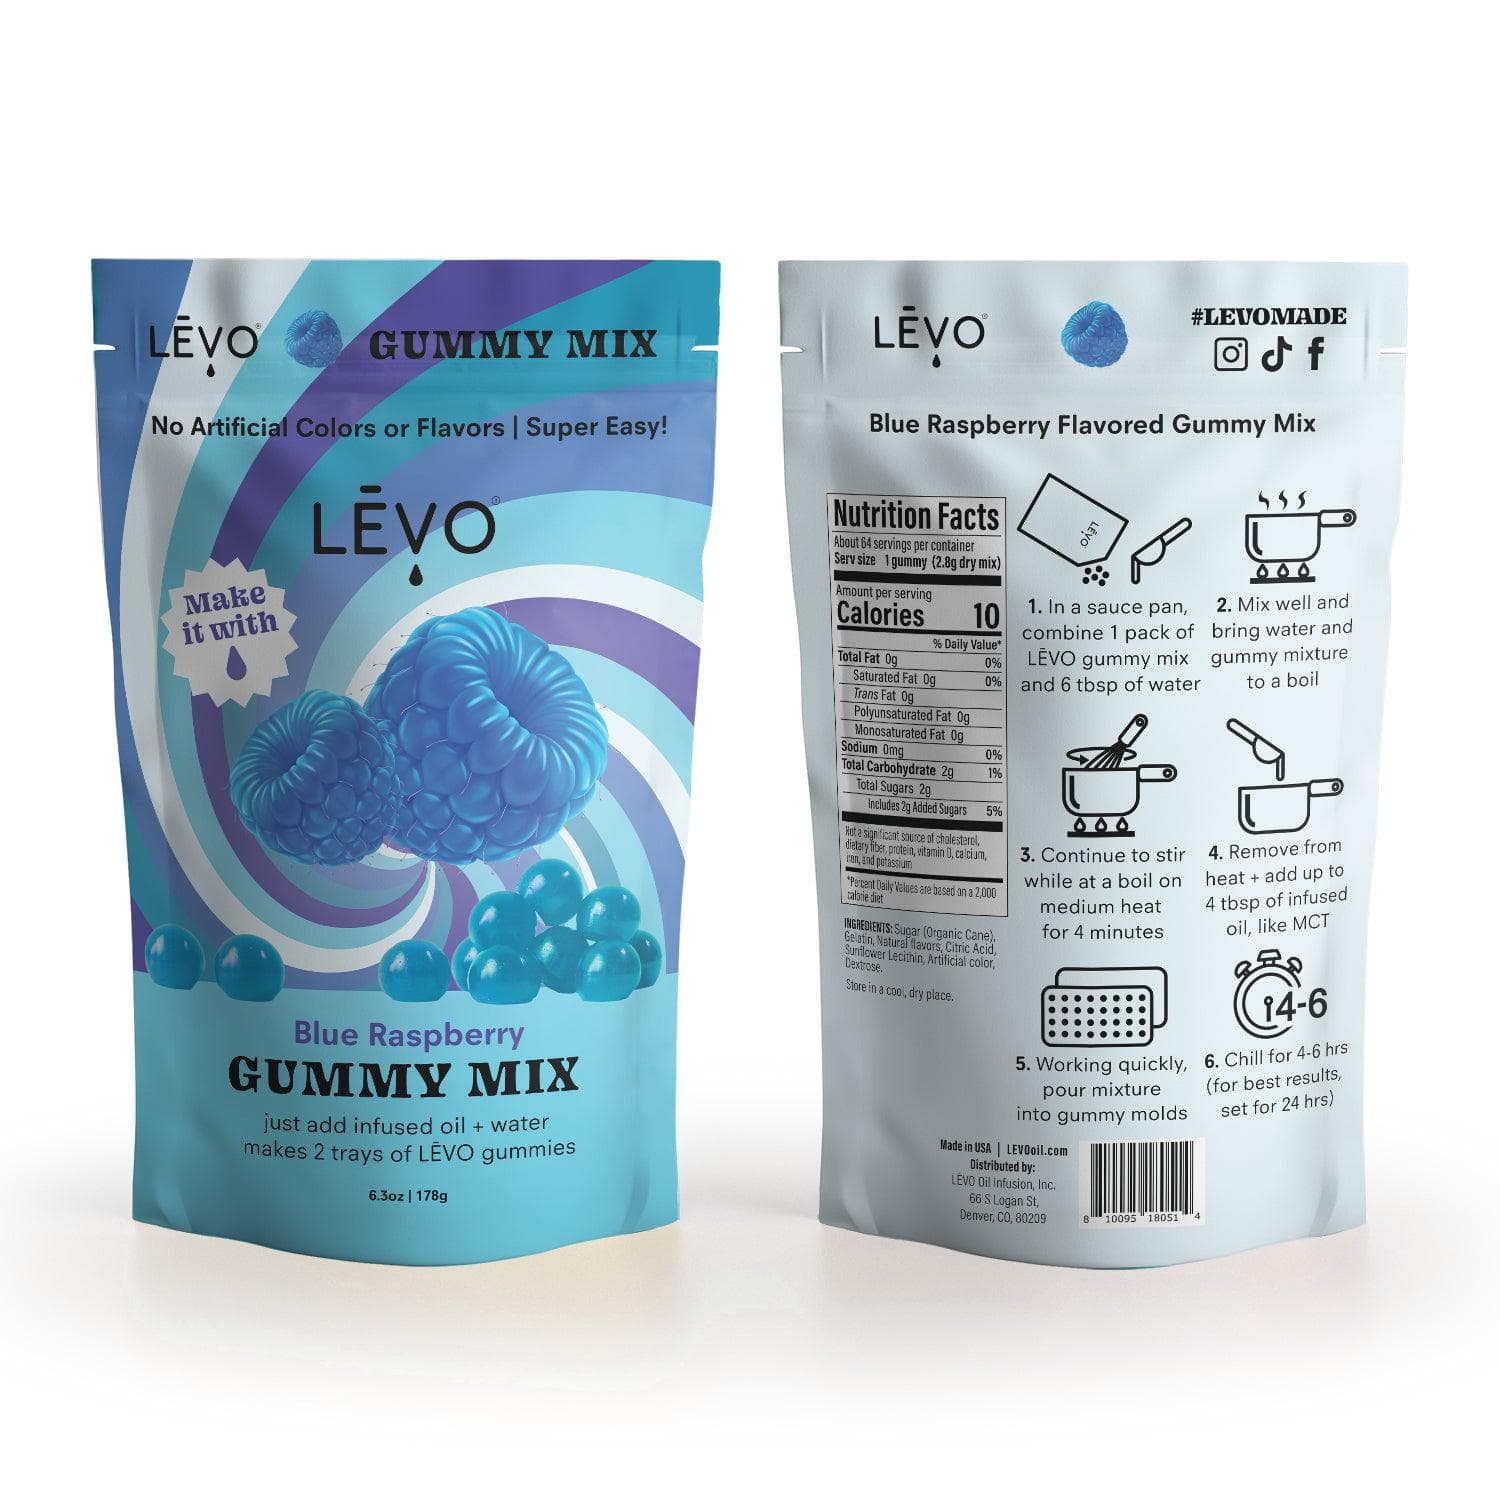 LEVO Gummy Mix in Blue Raspberry flavor - front and back of packaging